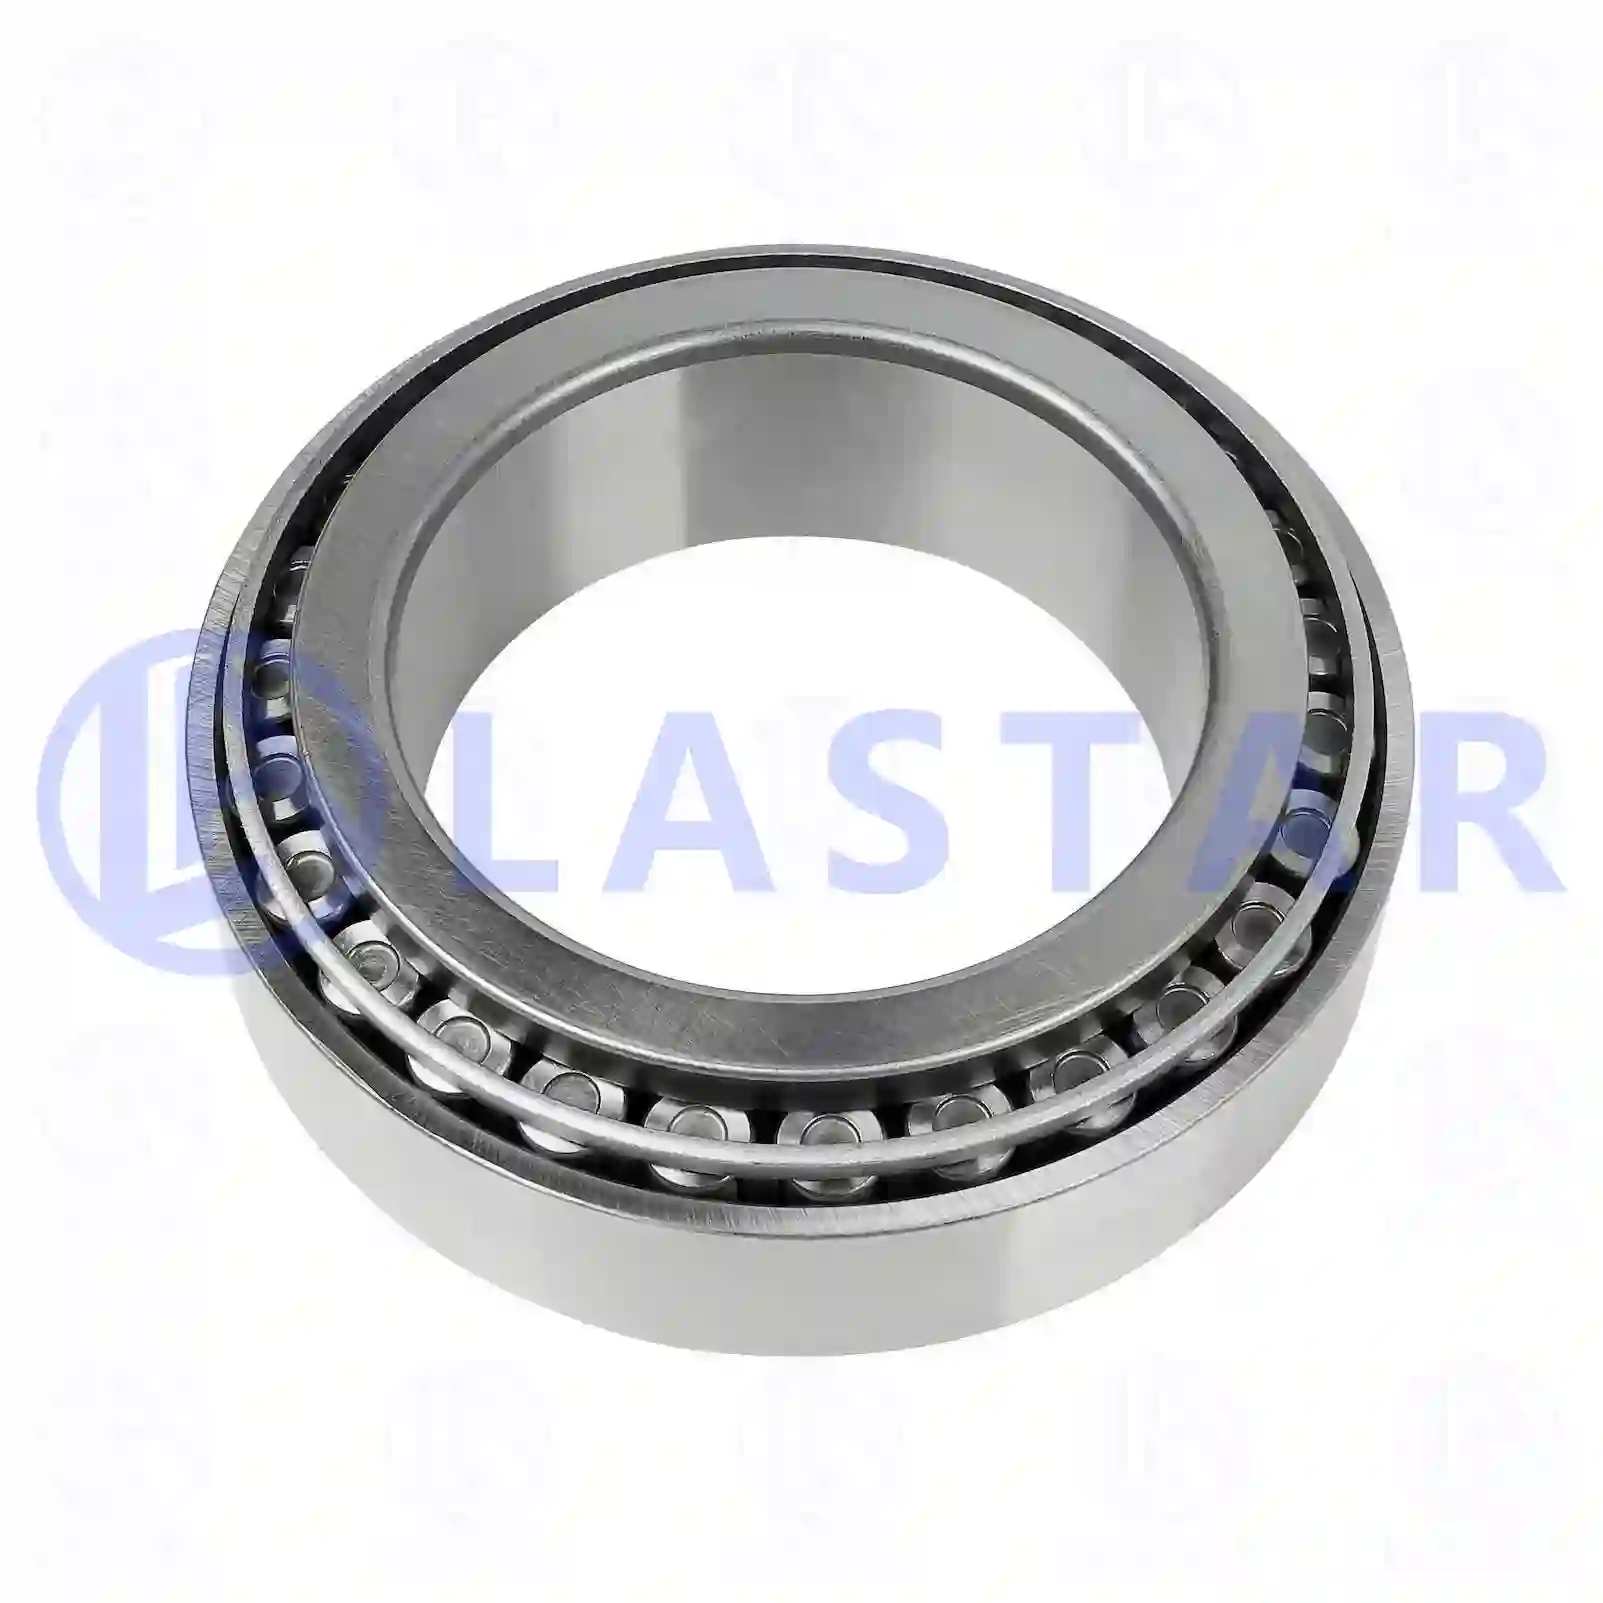 Hub Tapered roller bearing, la no: 77726047 ,  oem no:06324990044, 06324990151, 06324990155, 81934200103, 87524601802, 0049810705, 0049810905, 0059812105, 0089813505, 0189817105, 0959443022, 184116, ZG02993-0008 Lastar Spare Part | Truck Spare Parts, Auotomotive Spare Parts